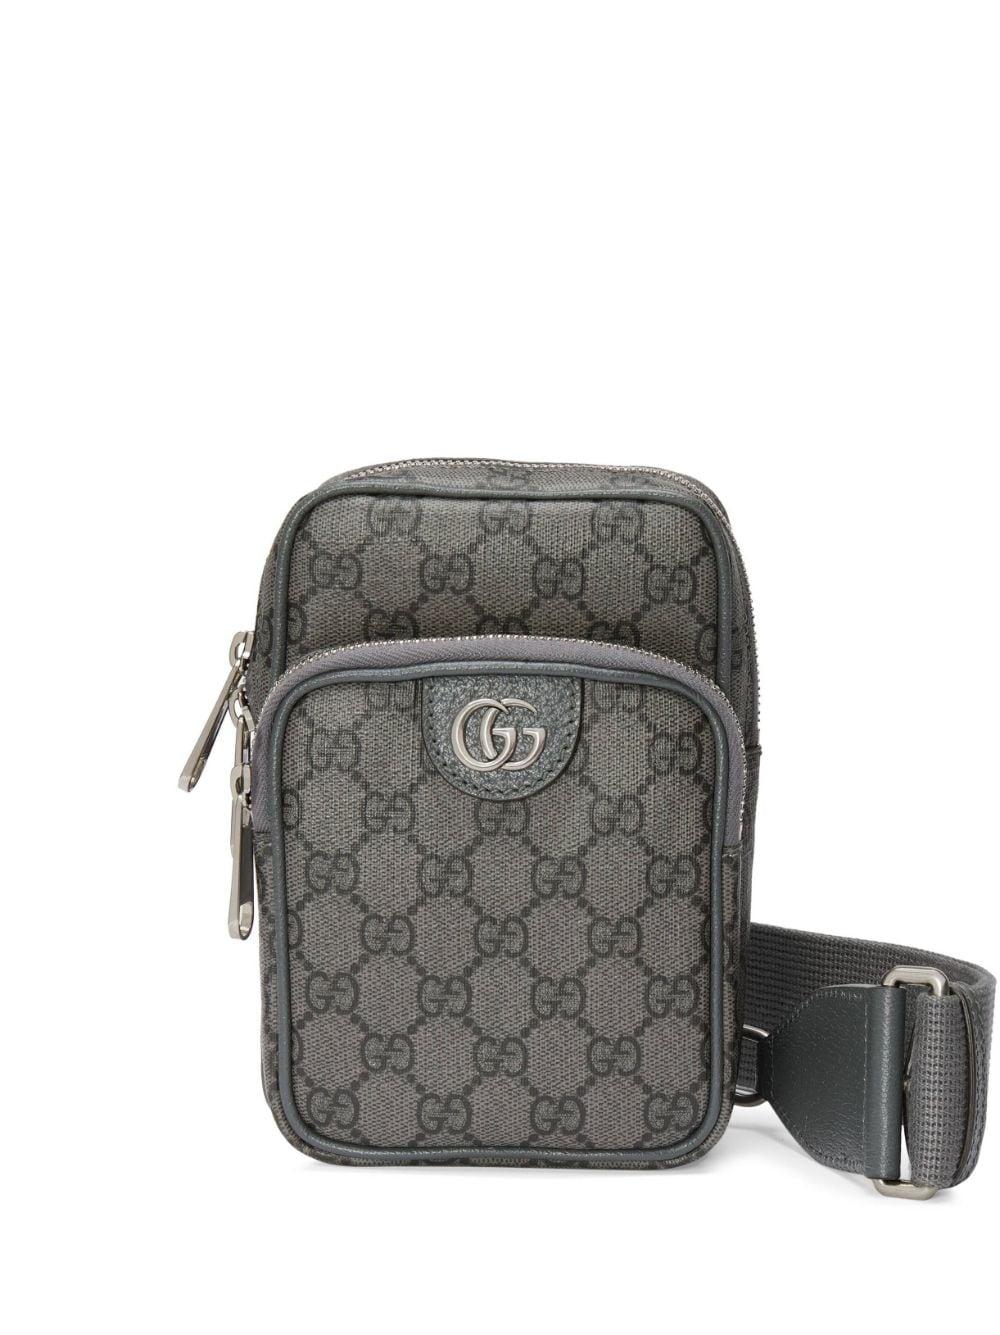 Gucci Ophidia GG Mini Bag in Gray for Men | Lyst